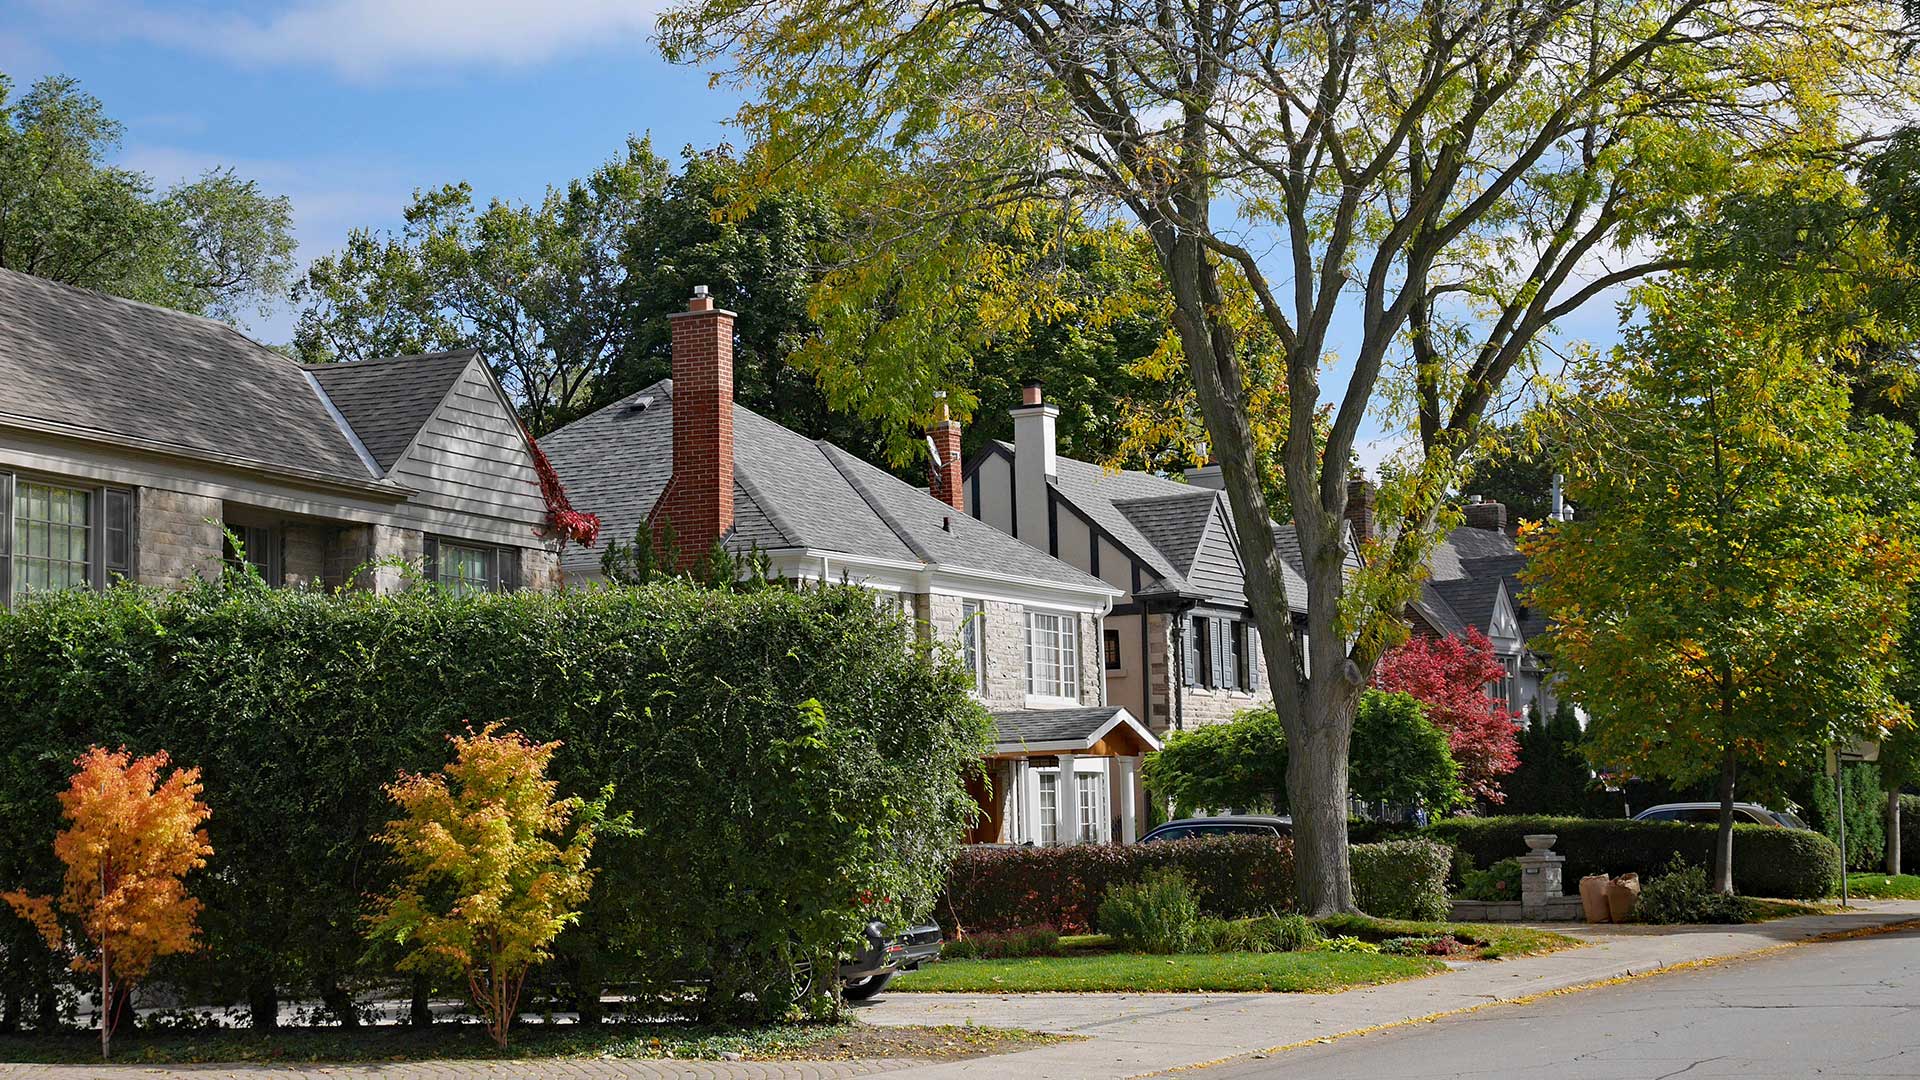 A row of suburban houses with many shrubs and trees.